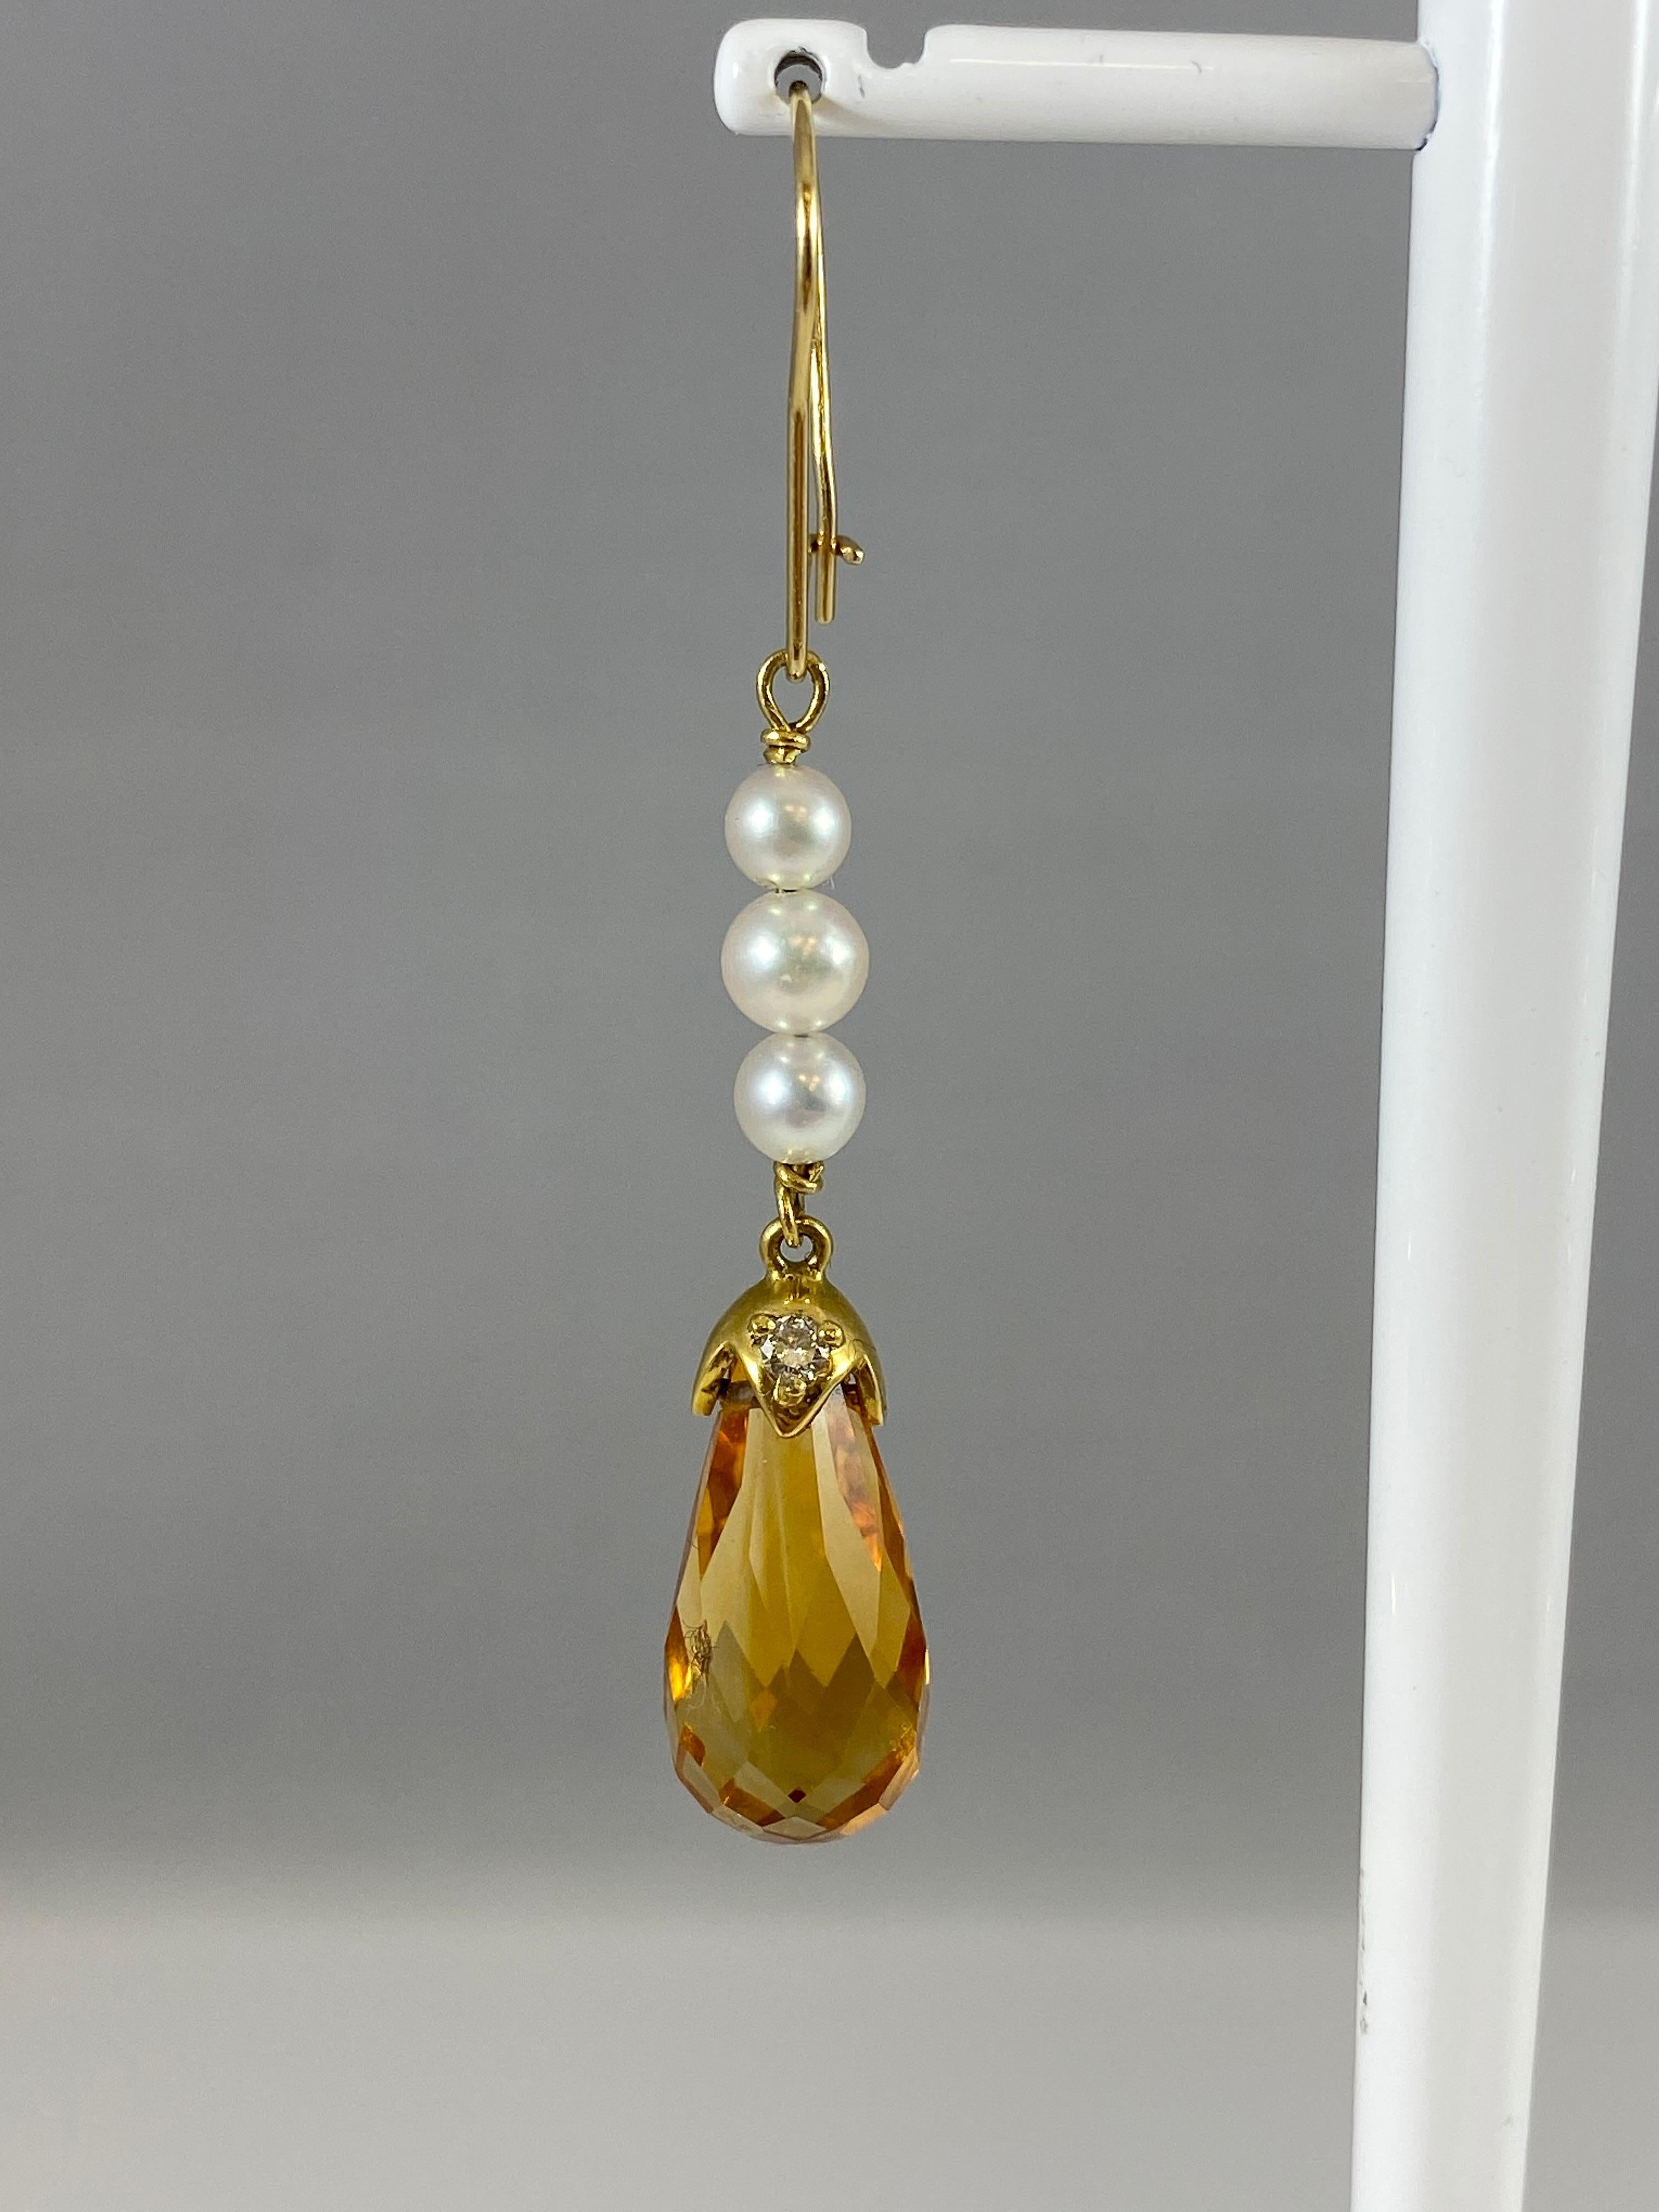 Hammerman Jewels 18 Karat Yellow Gold Citrine, Pearl, and Diamond Dangle Earrings. 0.09 carats of diamonds, two briolette citrine, and 6 pearls. 